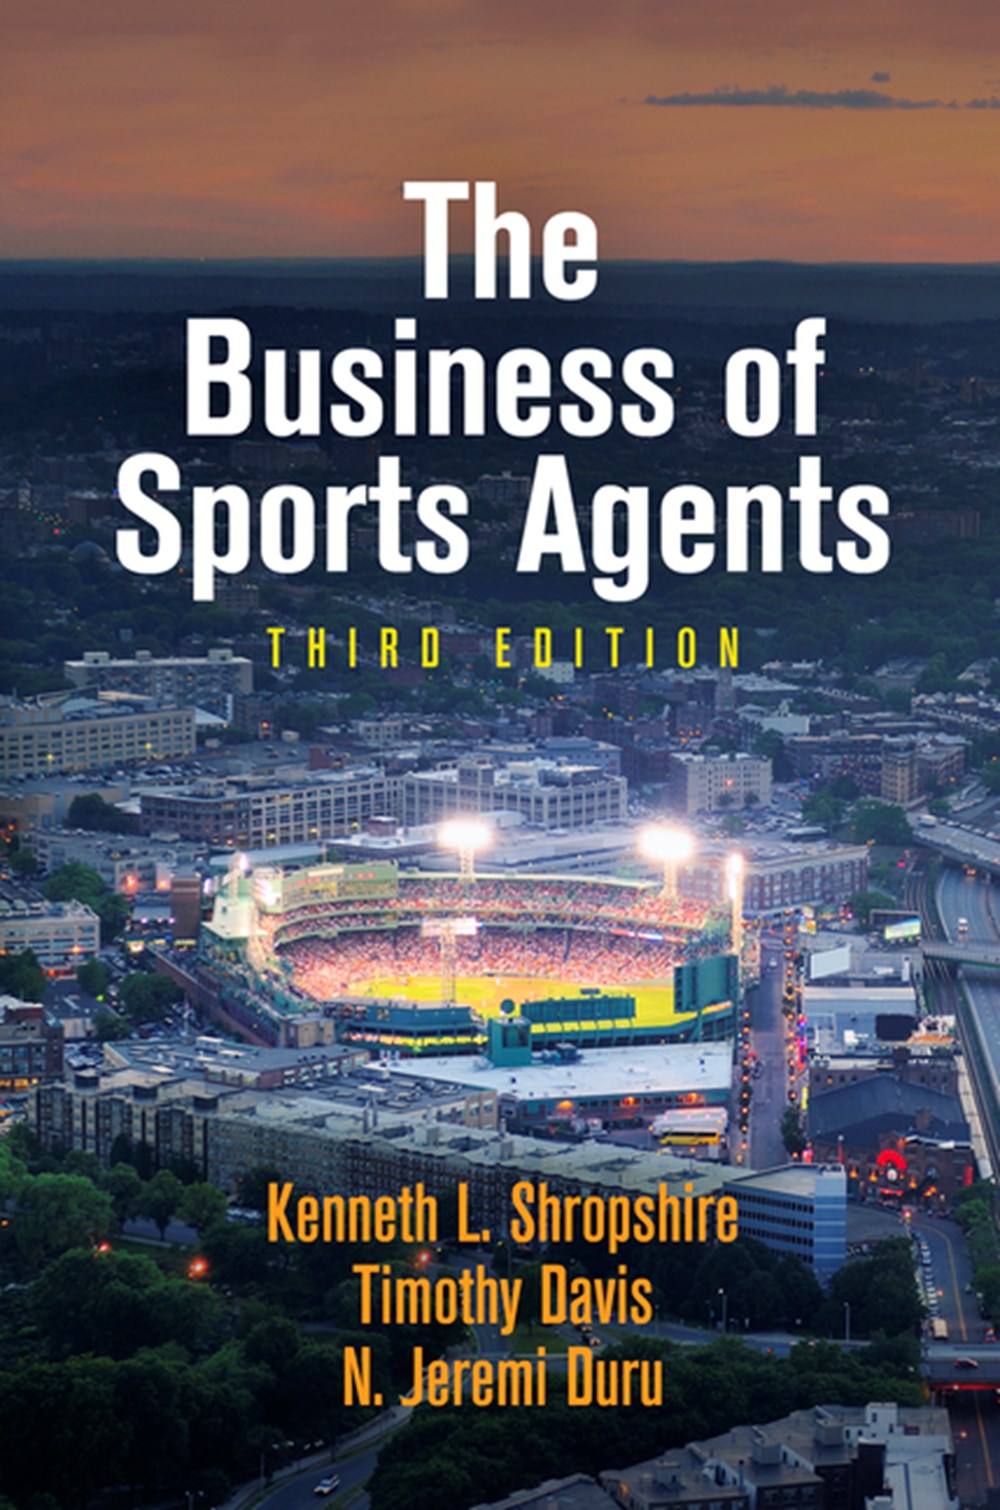 Business of Sports Agents